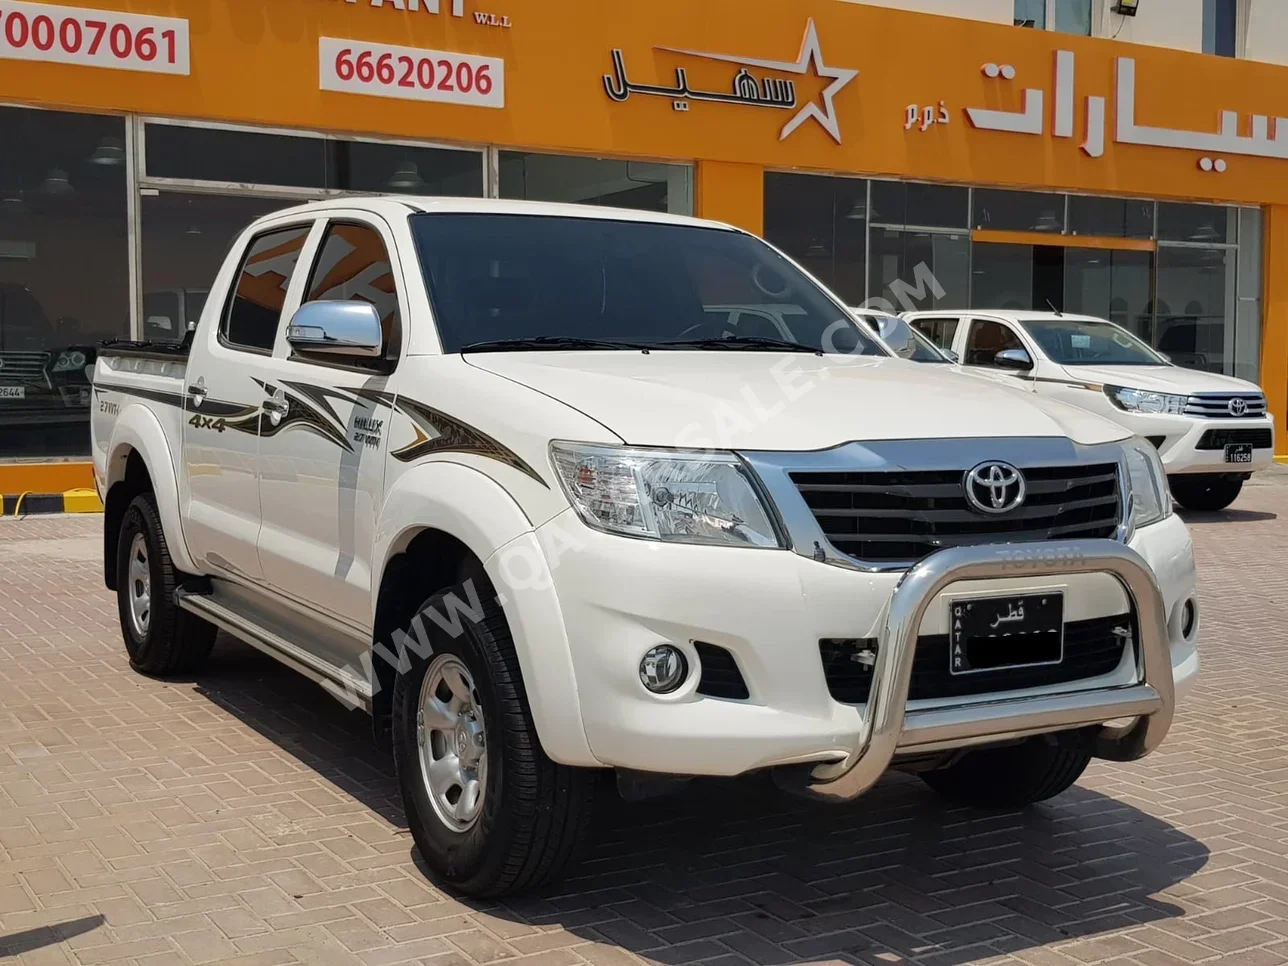 Toyota  Hilux  2015  Automatic  91,000 Km  4 Cylinder  Four Wheel Drive (4WD)  Pick Up  White